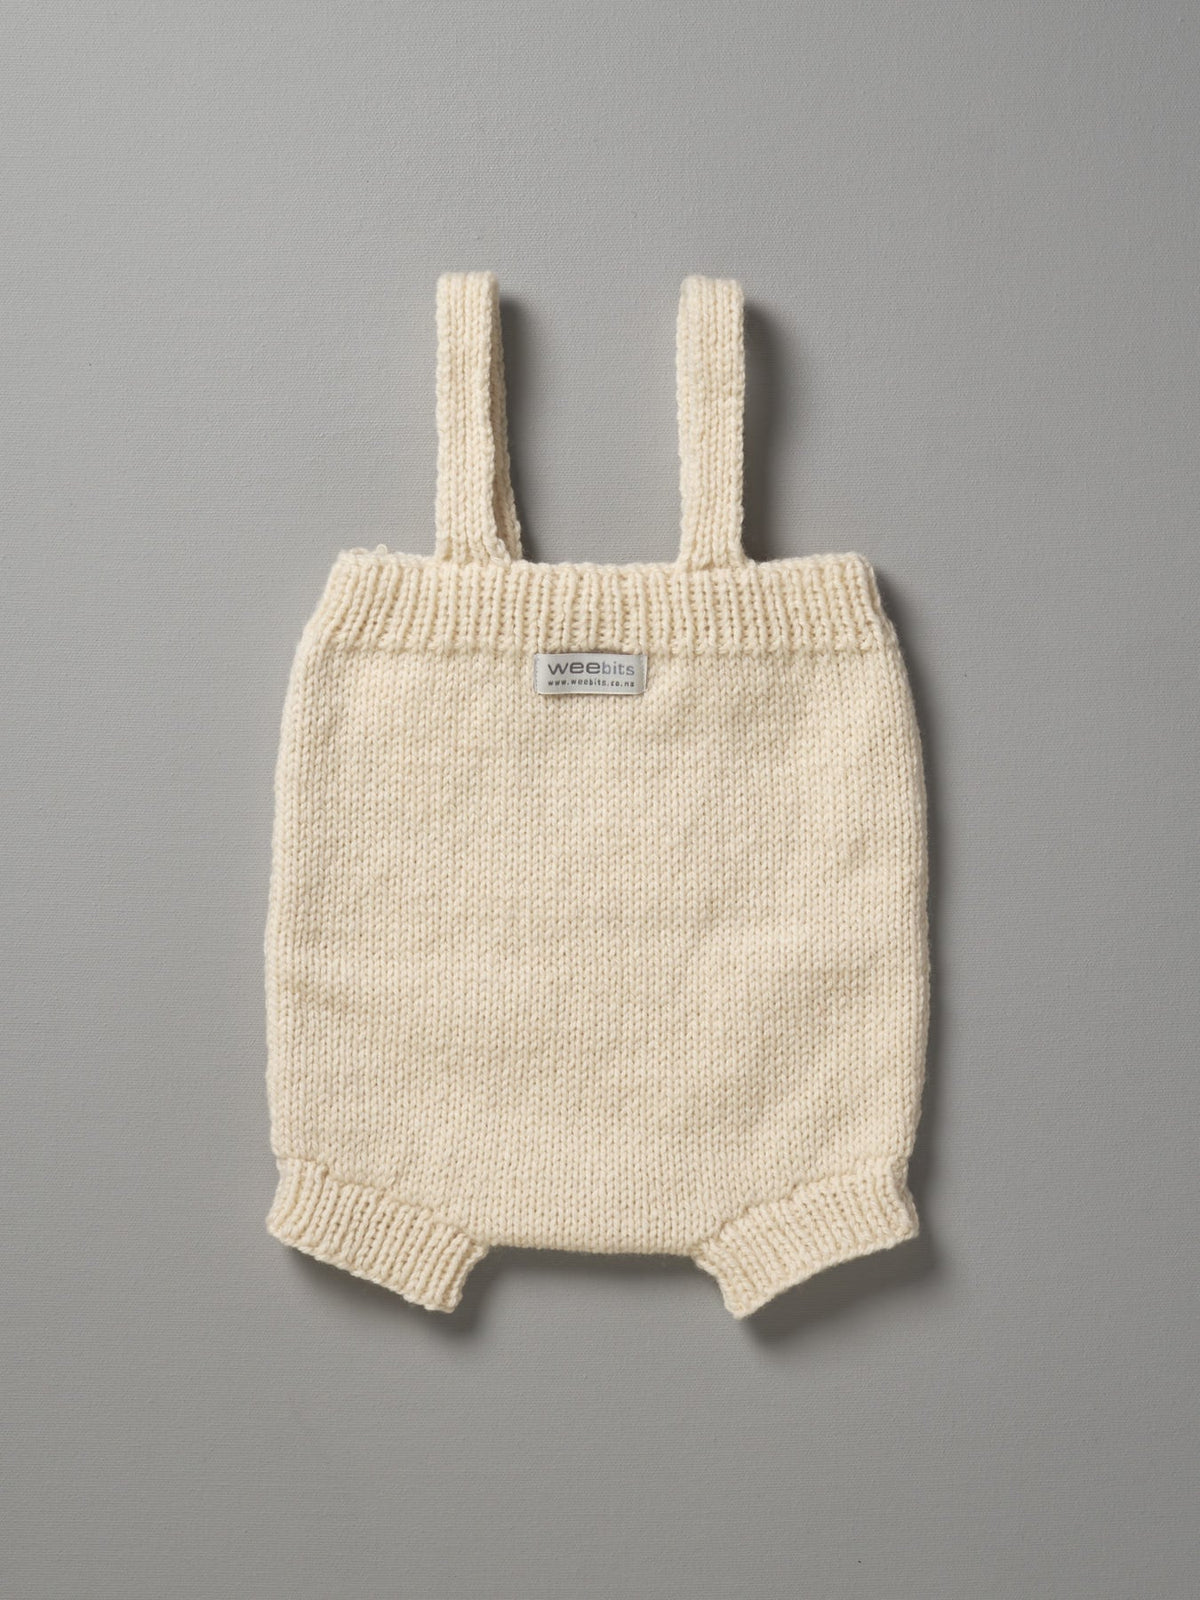 A Weebits Hand Knitted Romper - Natural on a grey background.